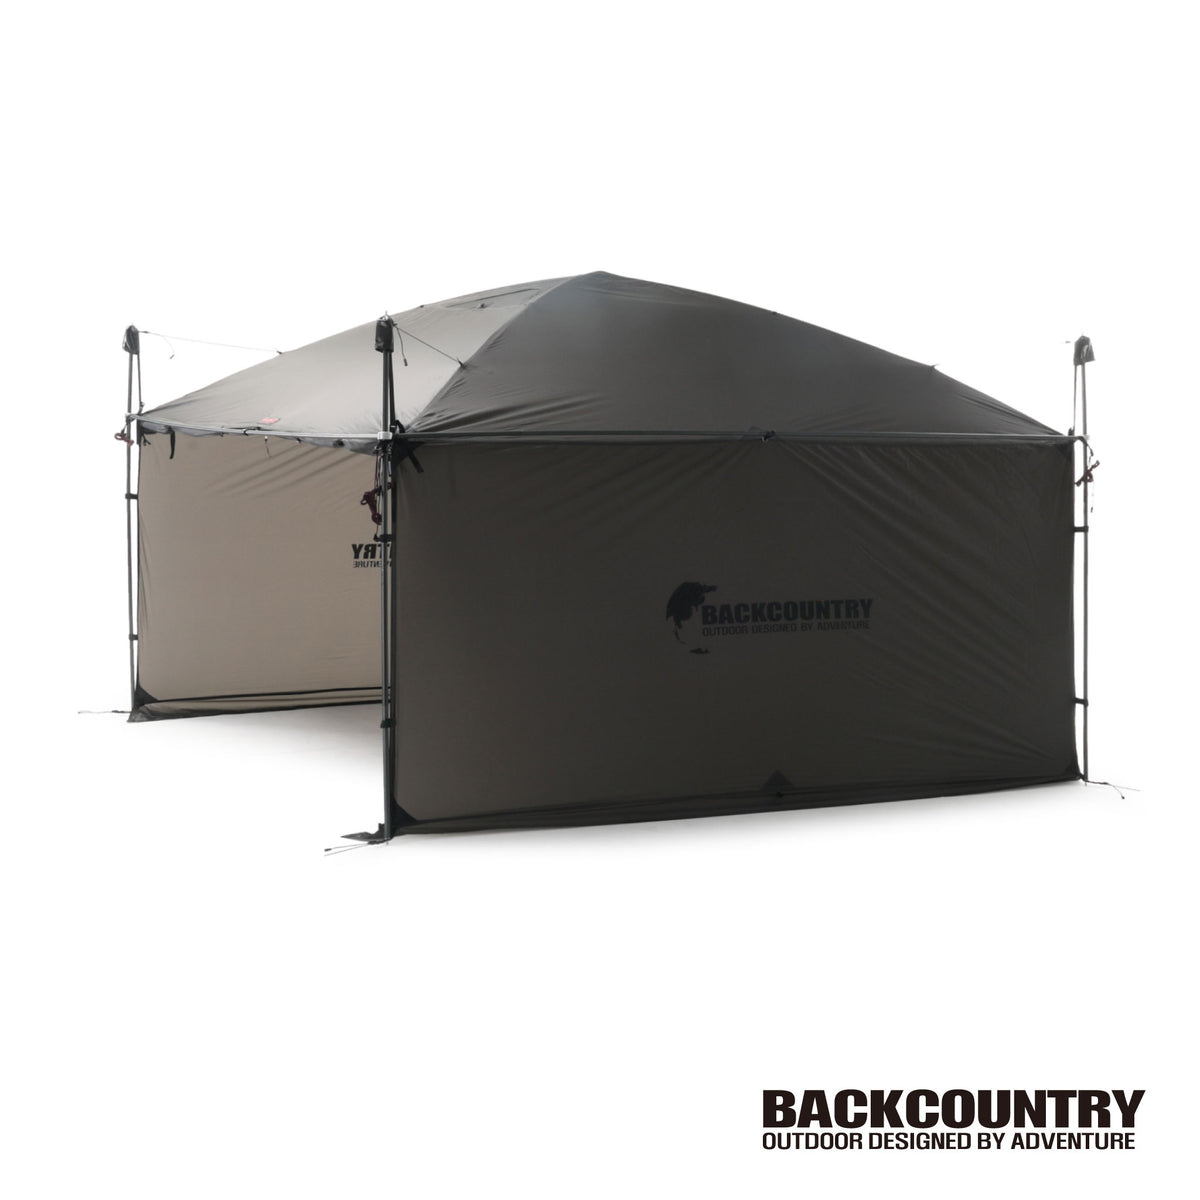 BackCountry 240 shelter CHARCOAL BLACK – eight